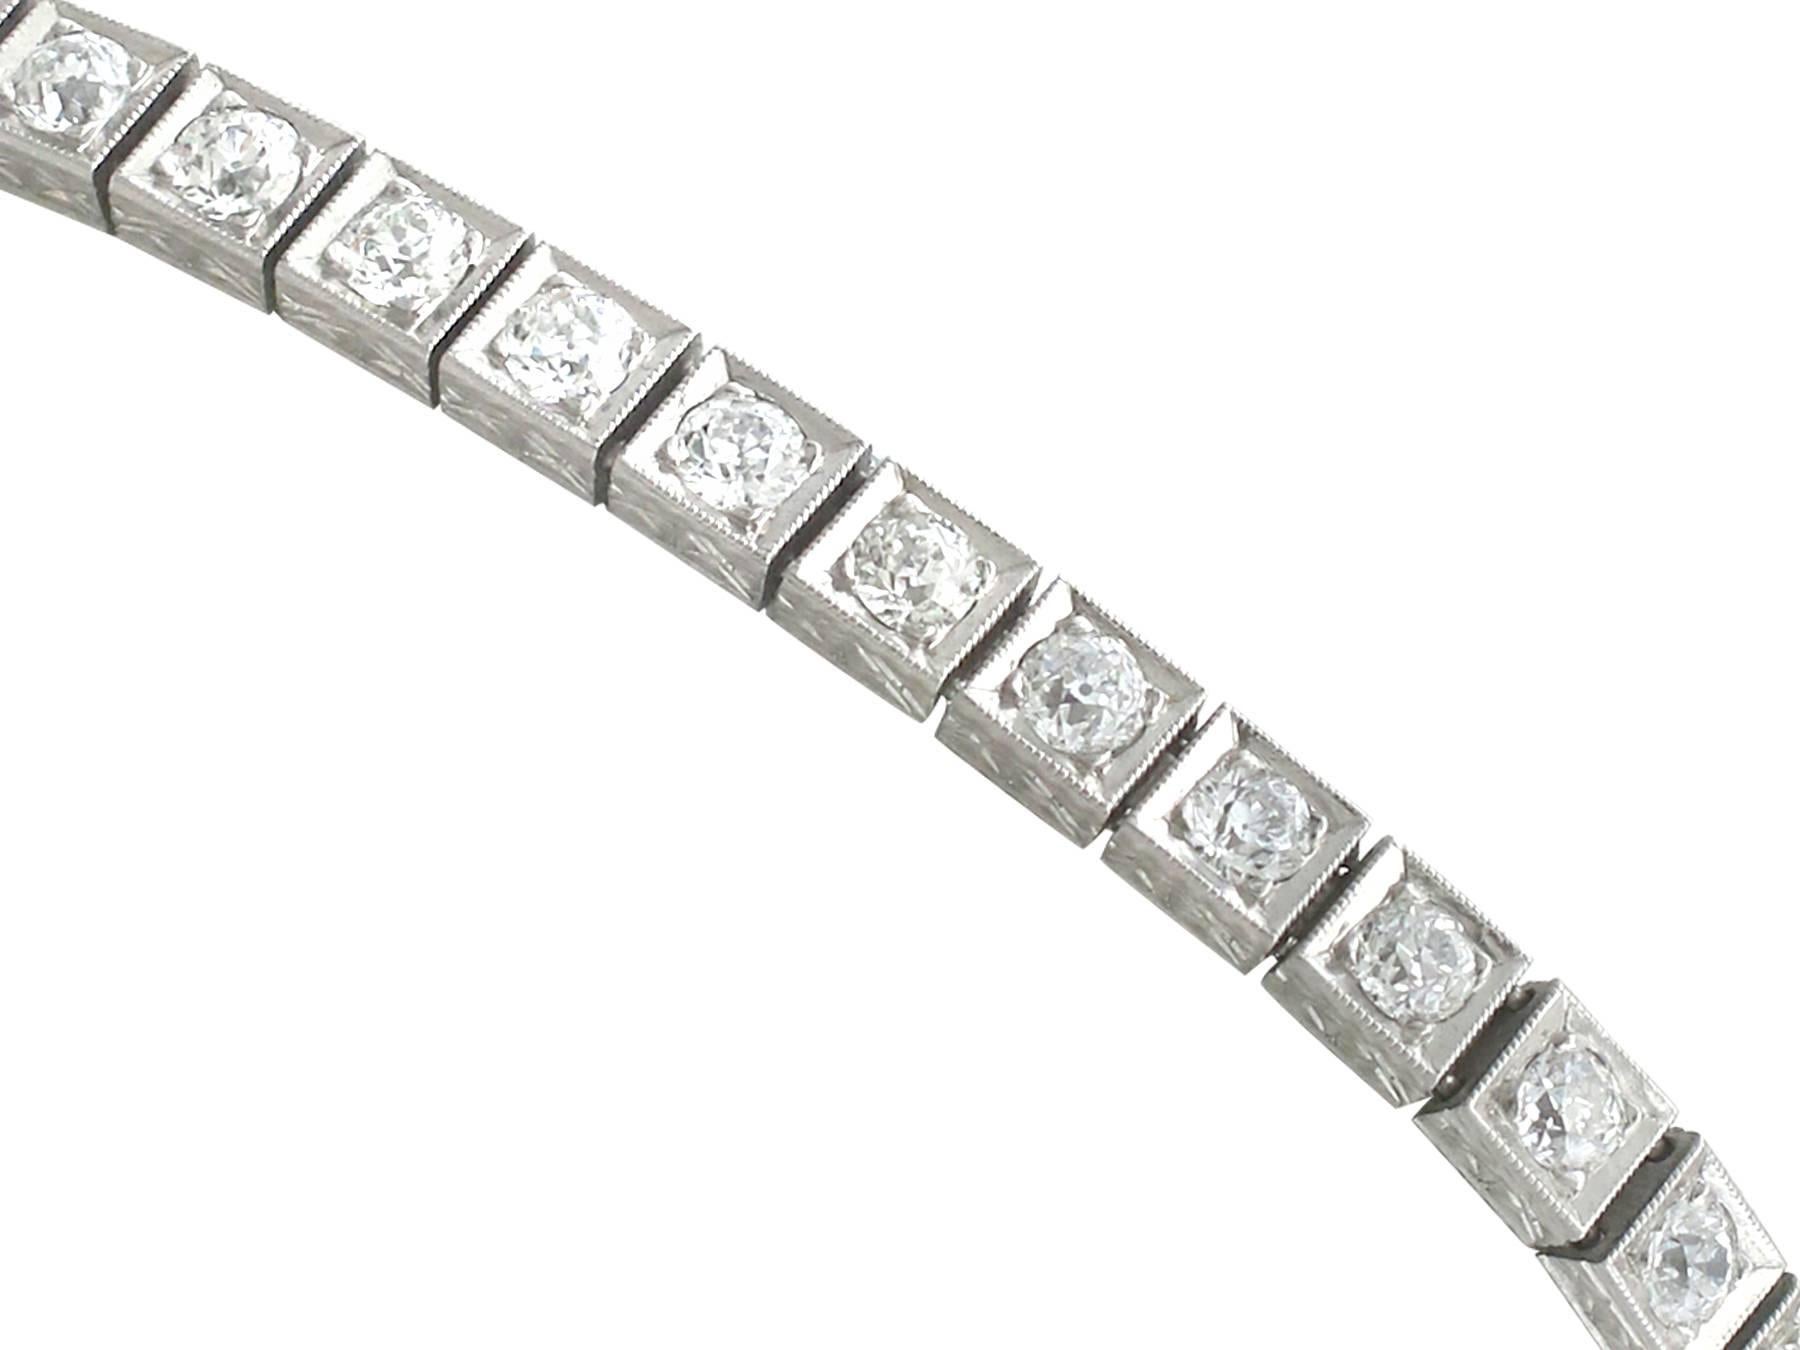 A stunning, fine and impressive 5.32 carat diamond and platinum line bracelet; part of our diverse antique jewelry and estate jewelry collections

This stunning antique diamond bracelet has been crafted in platinum.

The articulated link bracelet is